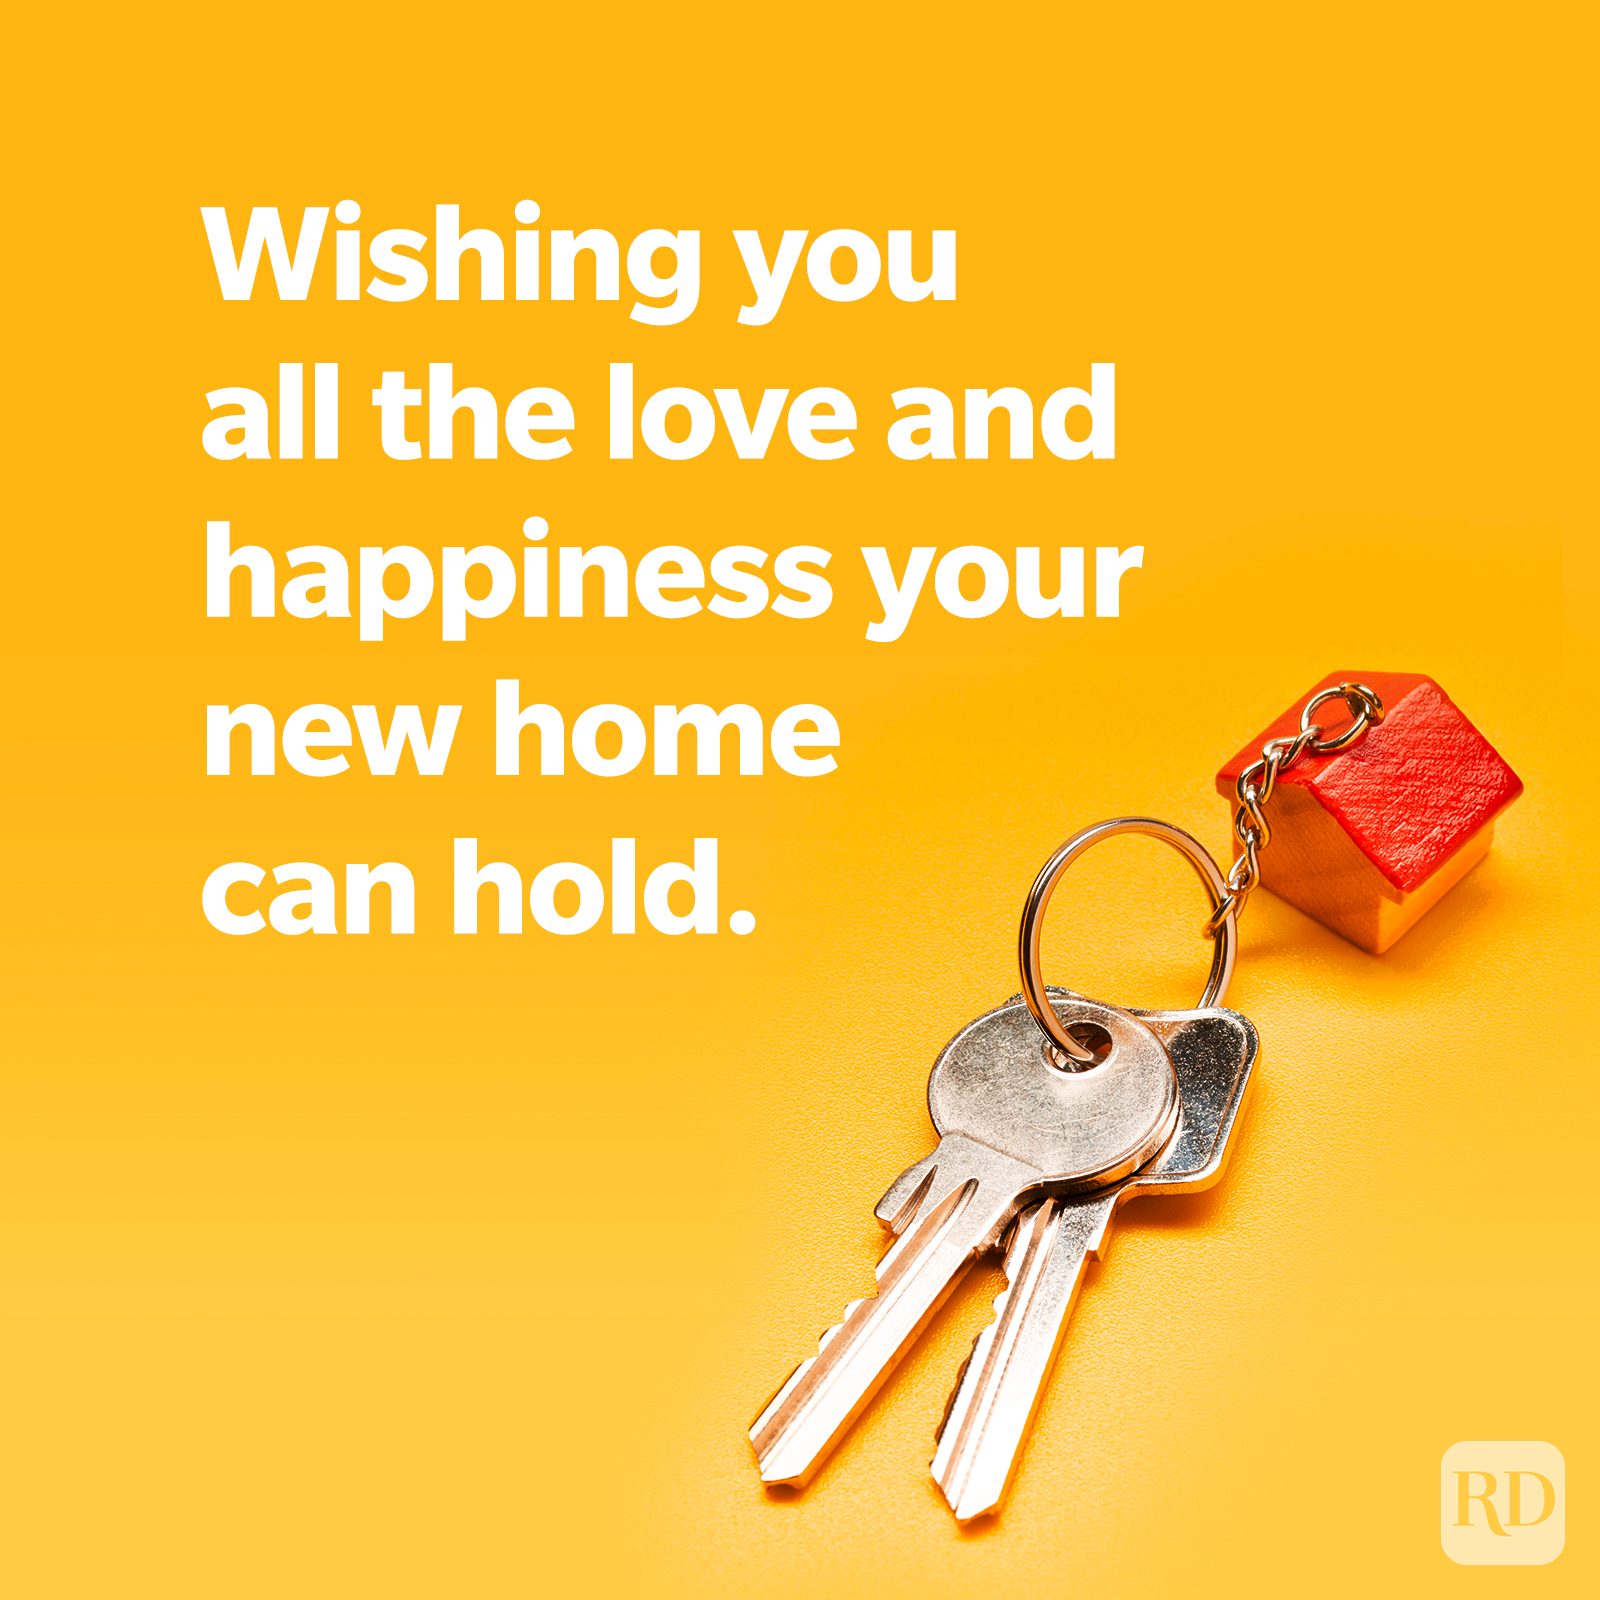 101 Thoughtful New Home Wishes5 GettyImages 1131970178 ?fit=700